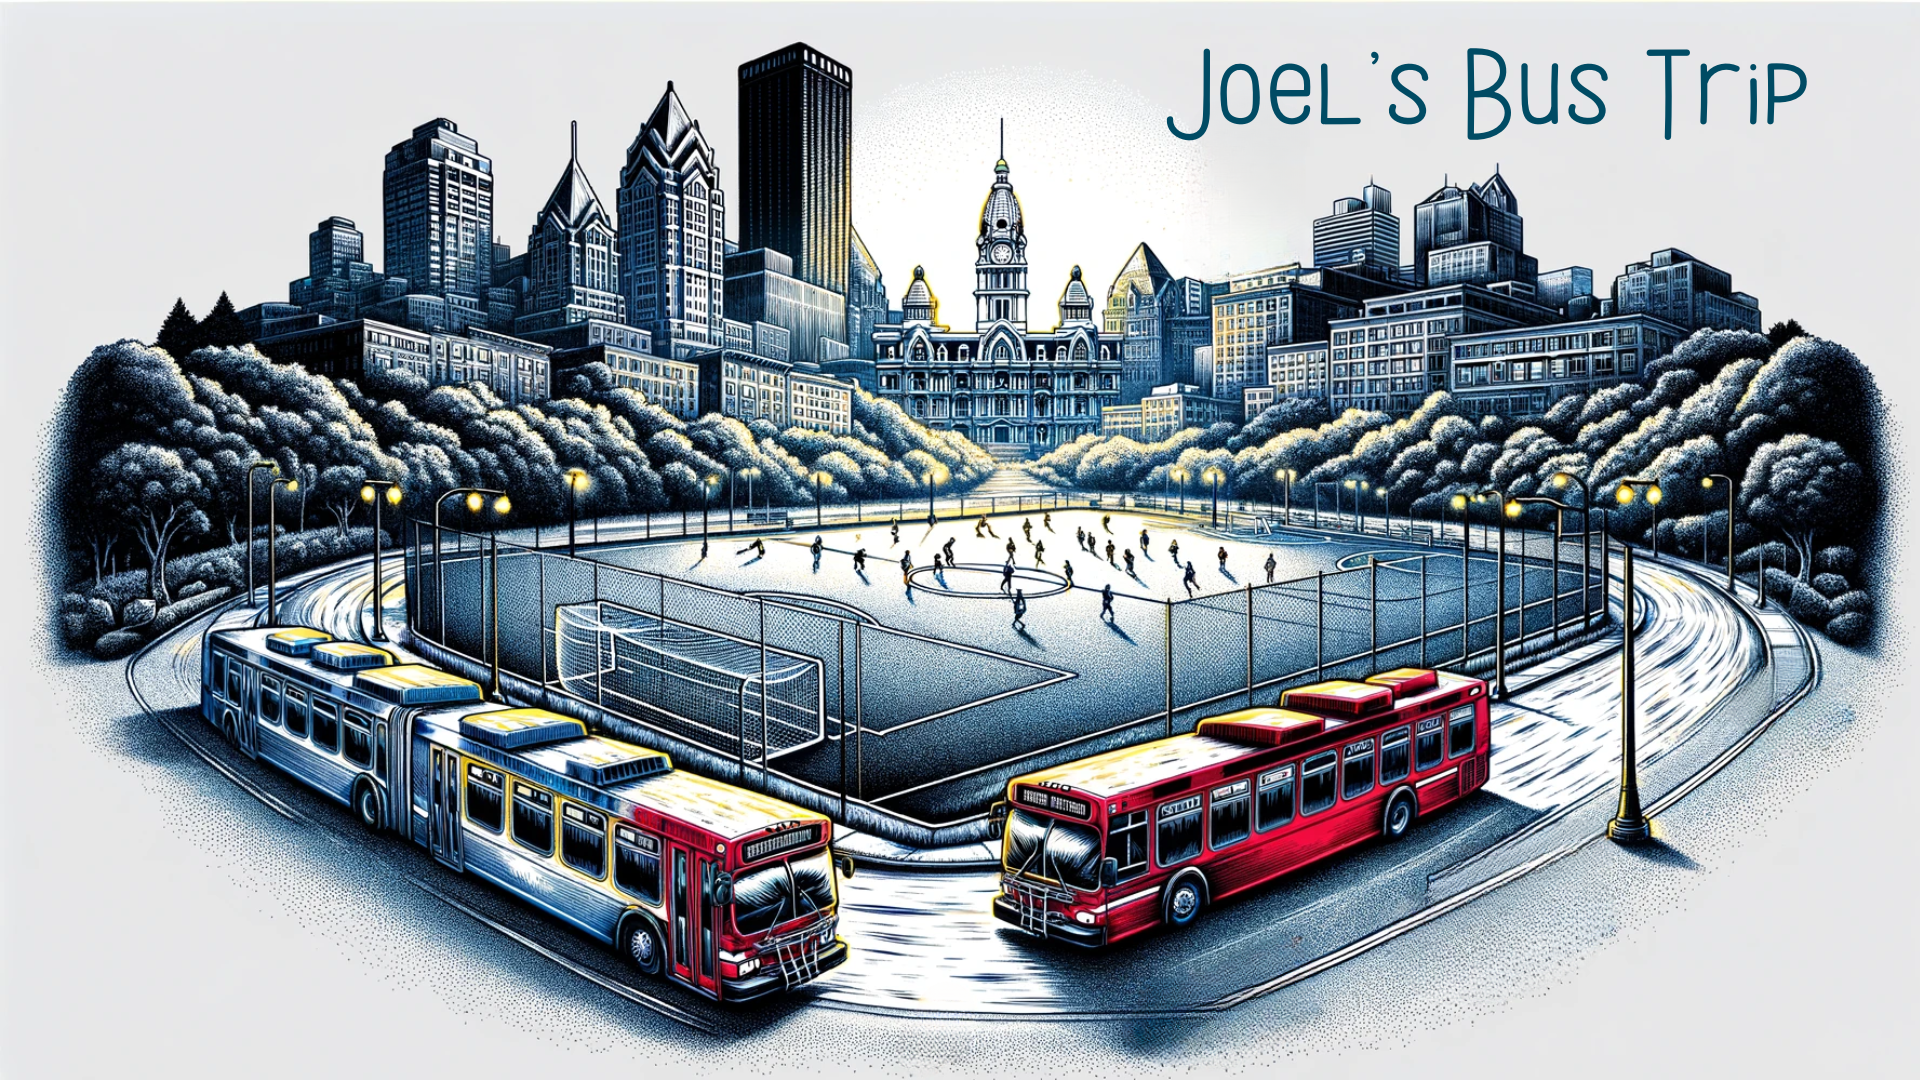 An illustration of a soccer field in a city generated by artificial intelligence. Text on the top right reads "Joel's Bus Trip".